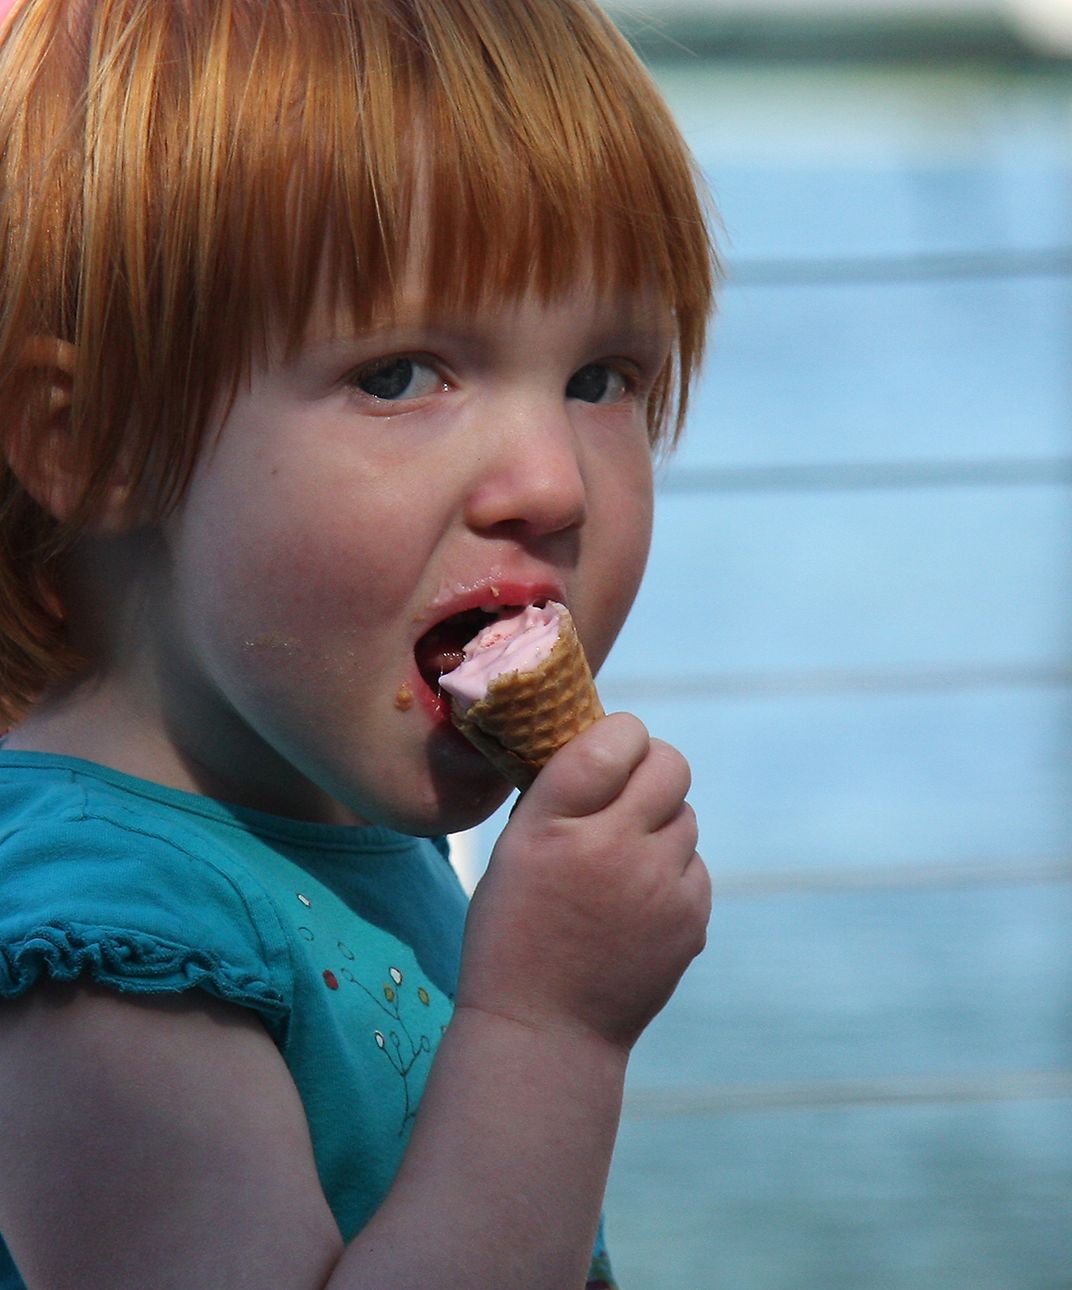 15 - A little redhead nears the end of her ice cream cone. It’s not over until it’s over.